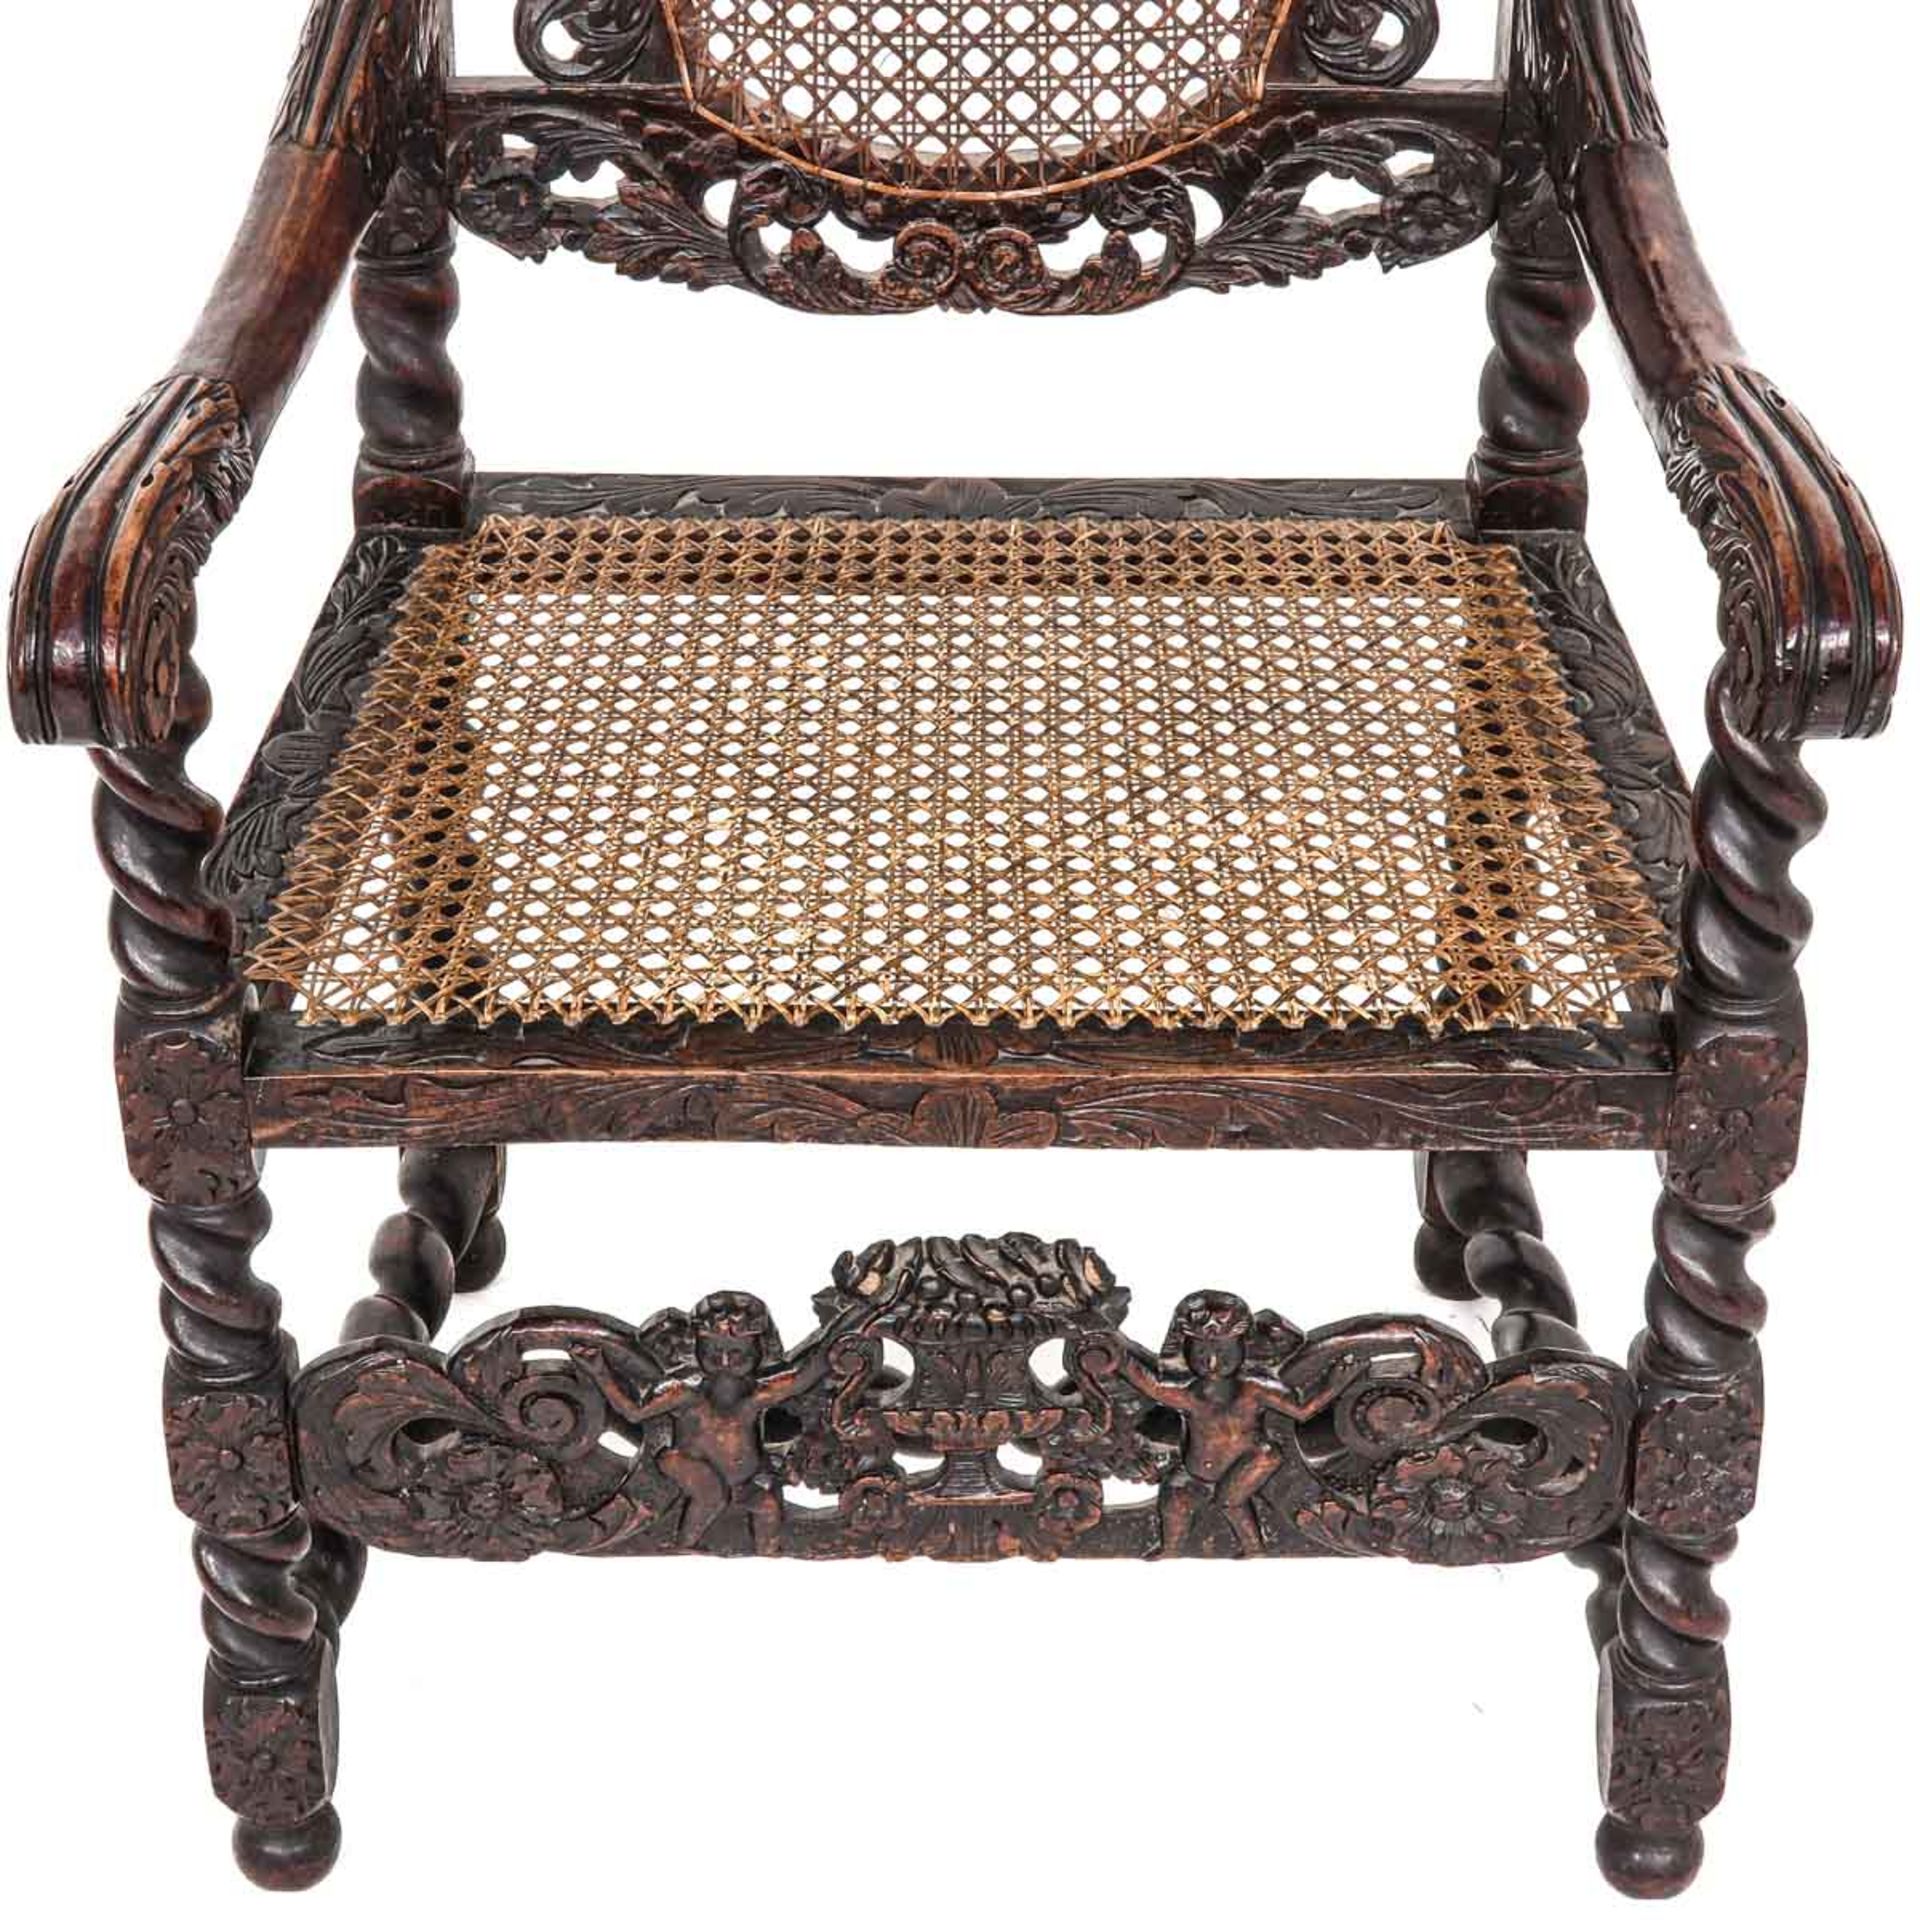 A Pair of William and Mary Chairs - Image 7 of 10